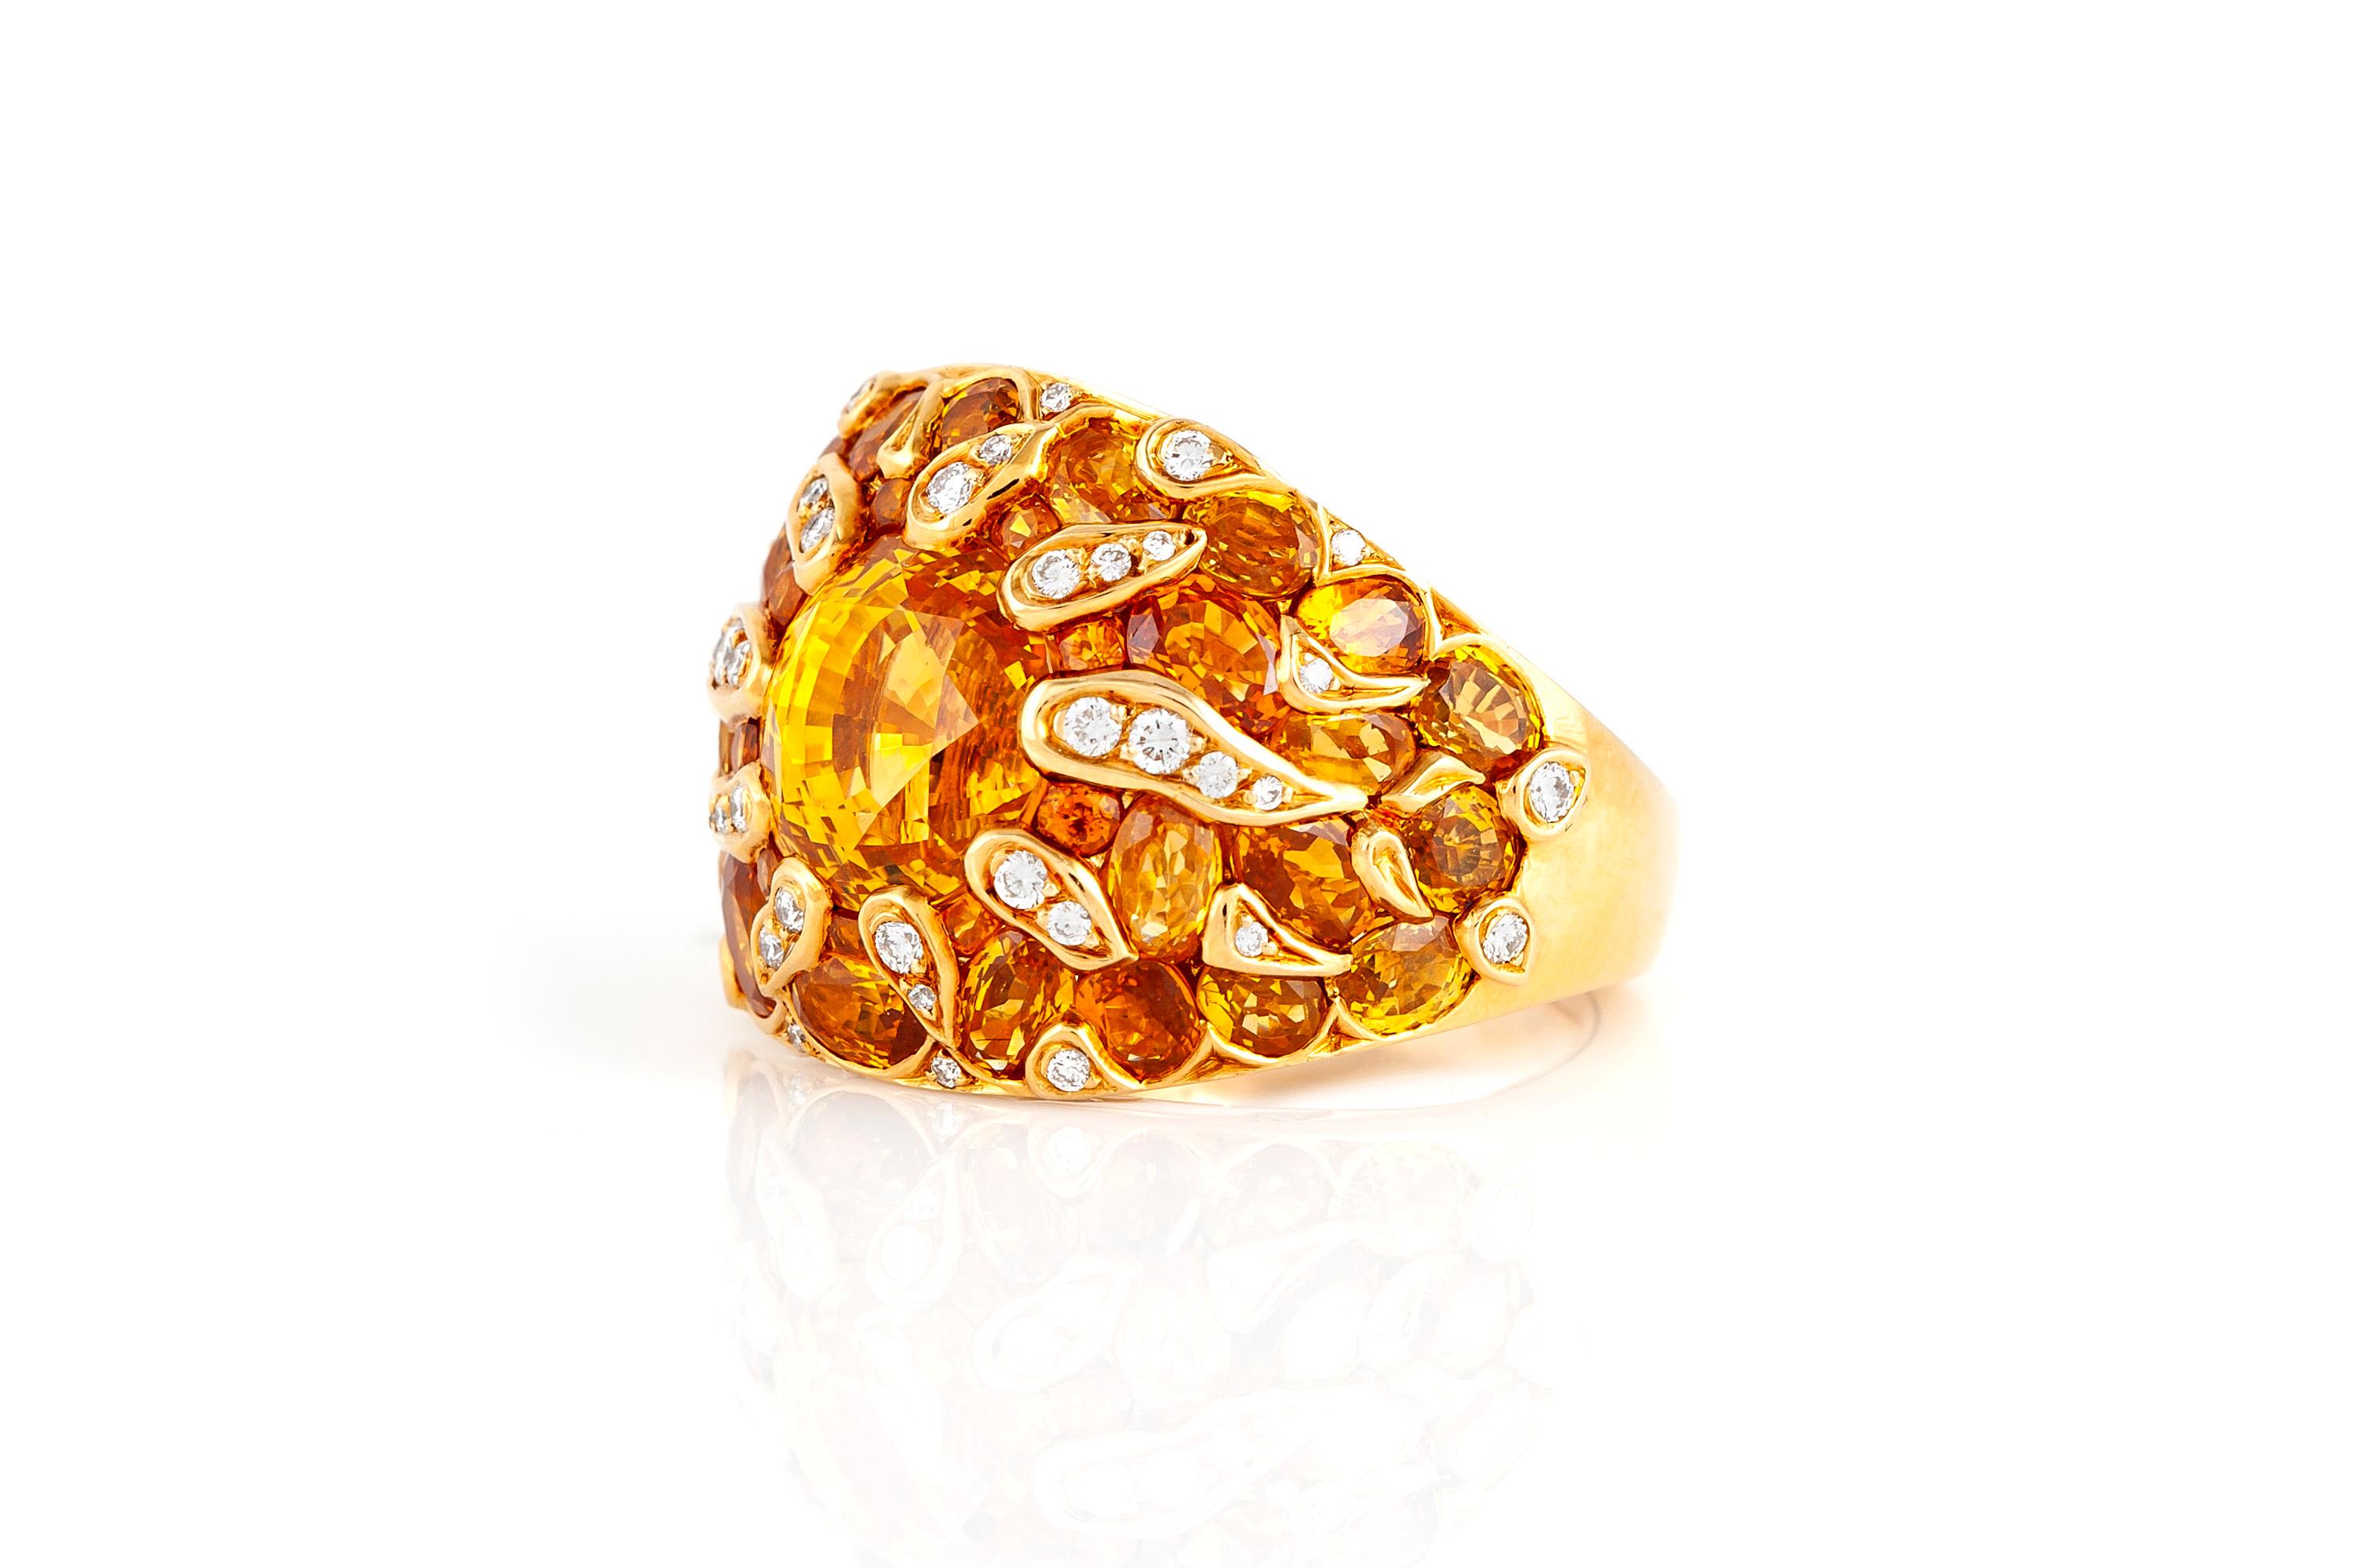 Chic and sunny ring created by Chanel. Features an orange sapphire in the center accentuated with yellow sapphires and diamonds set in 18K yellow gold.